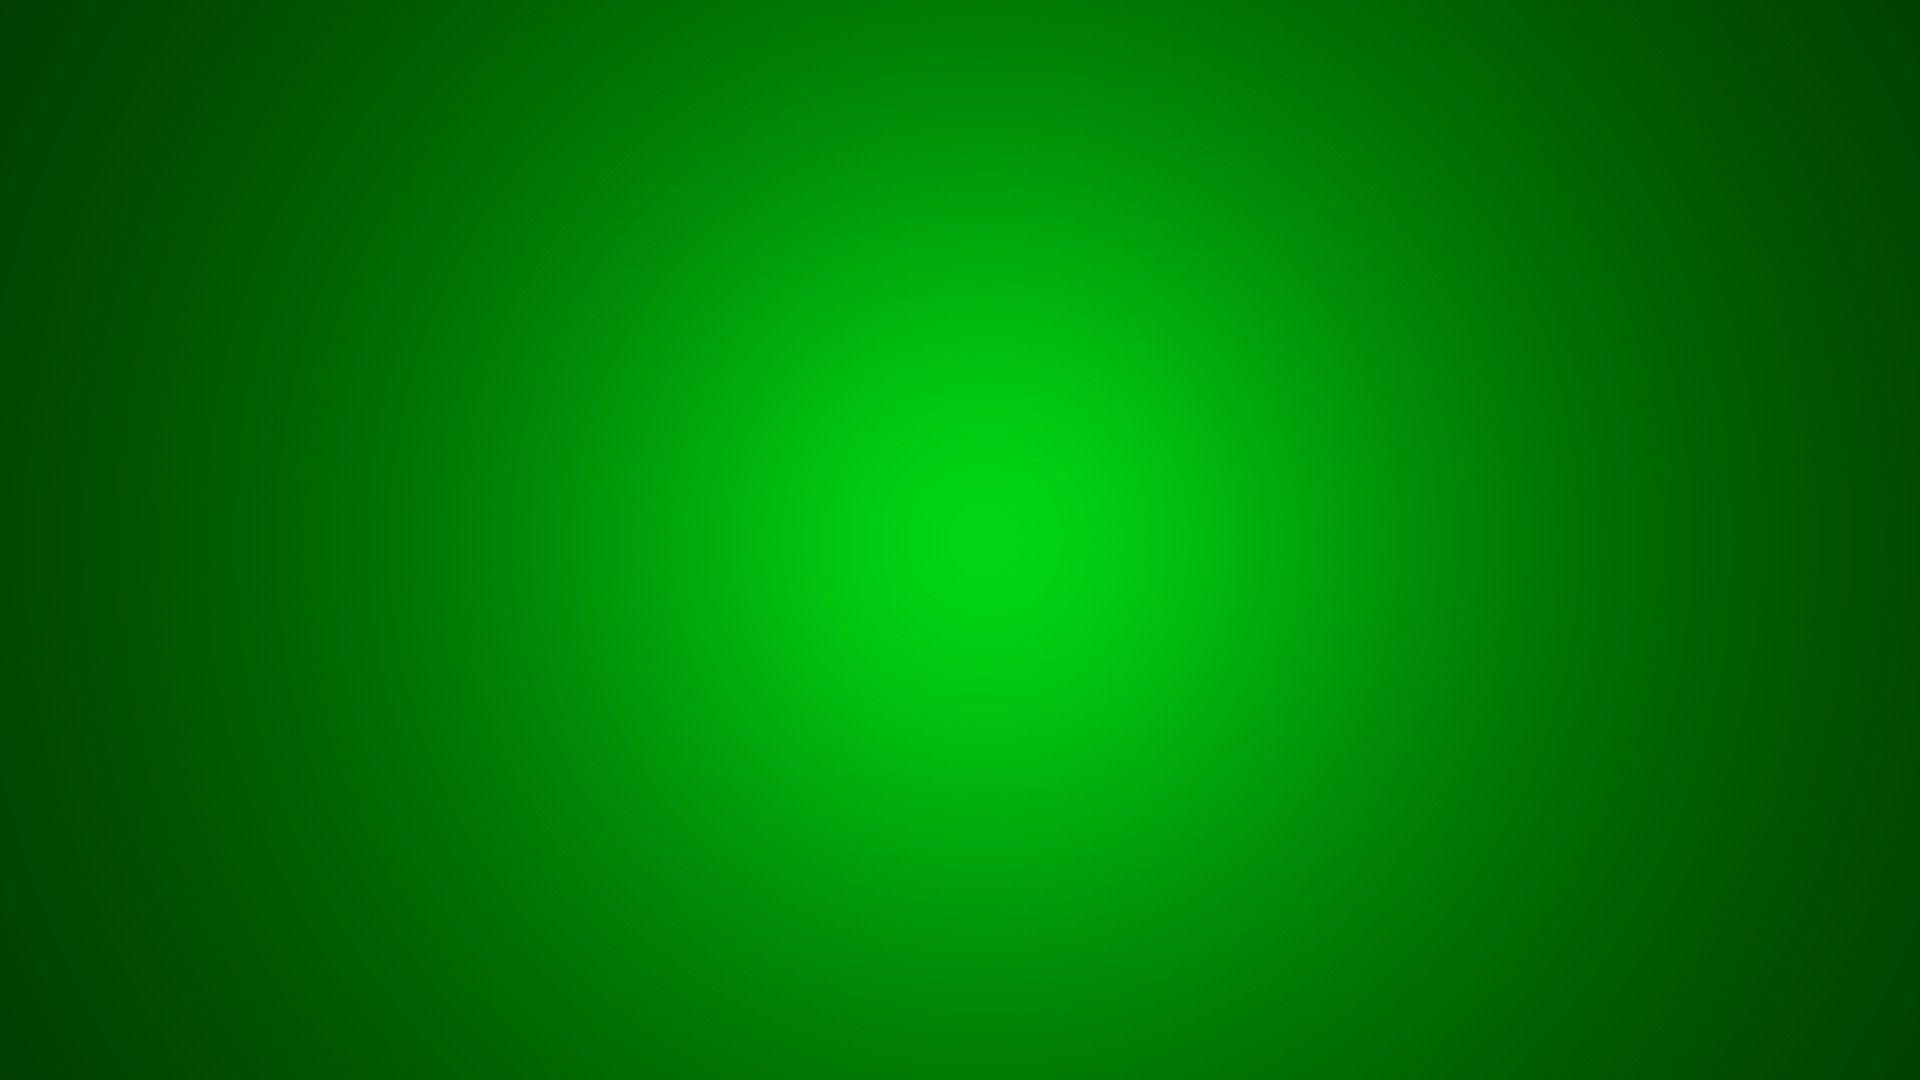 Green Backgrounds Wallpapers - Wallpaper Cave